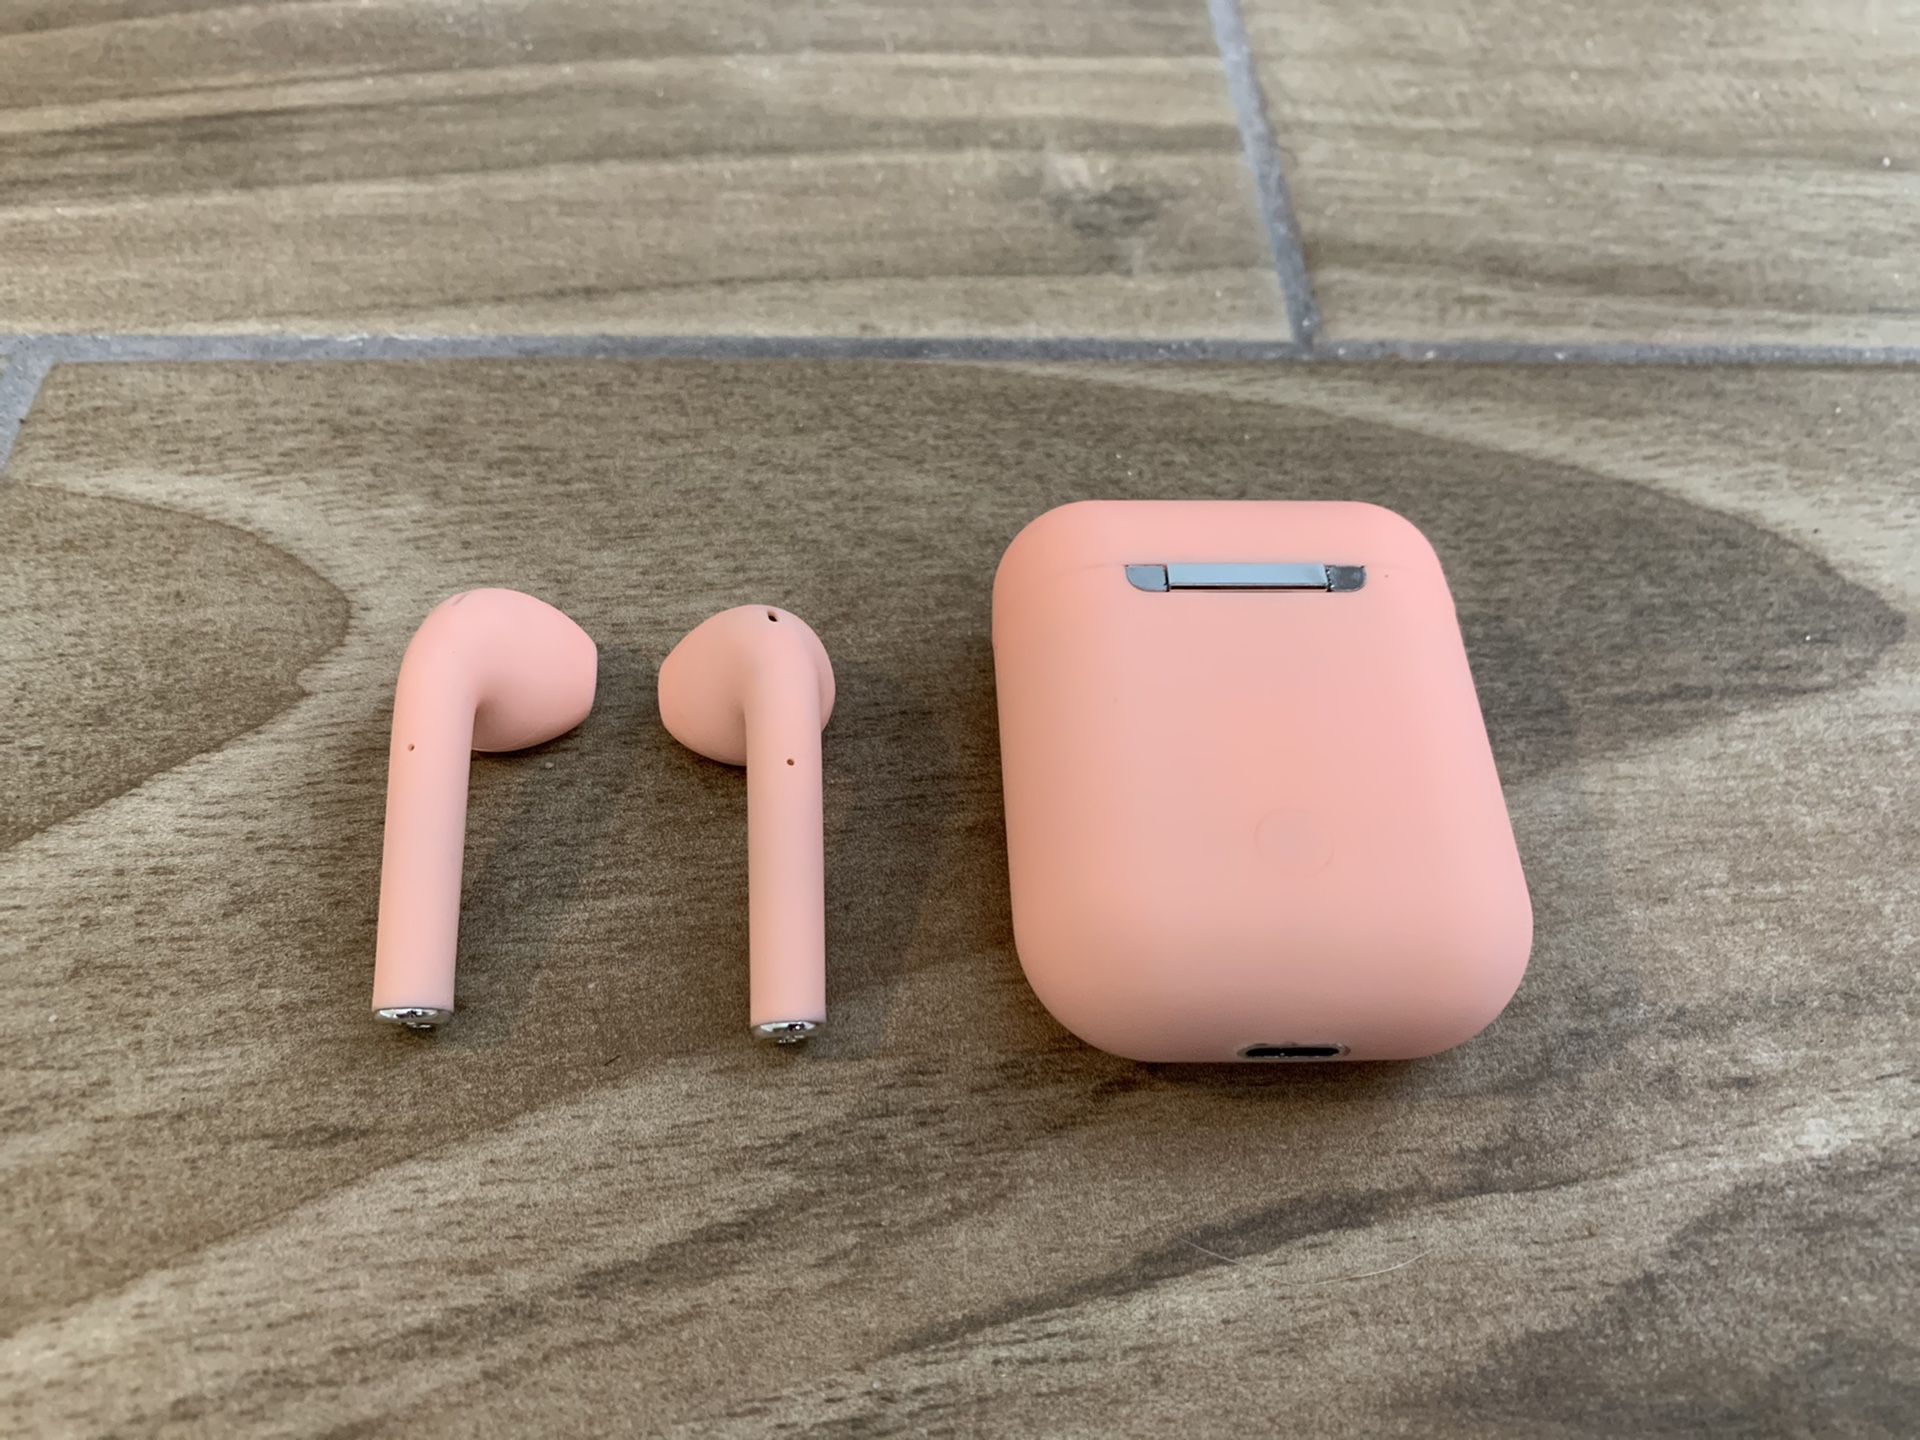 Pink inpod 12 very similar to AirPods. Buy 1 for 15$ or 2 for 25$. More colors available